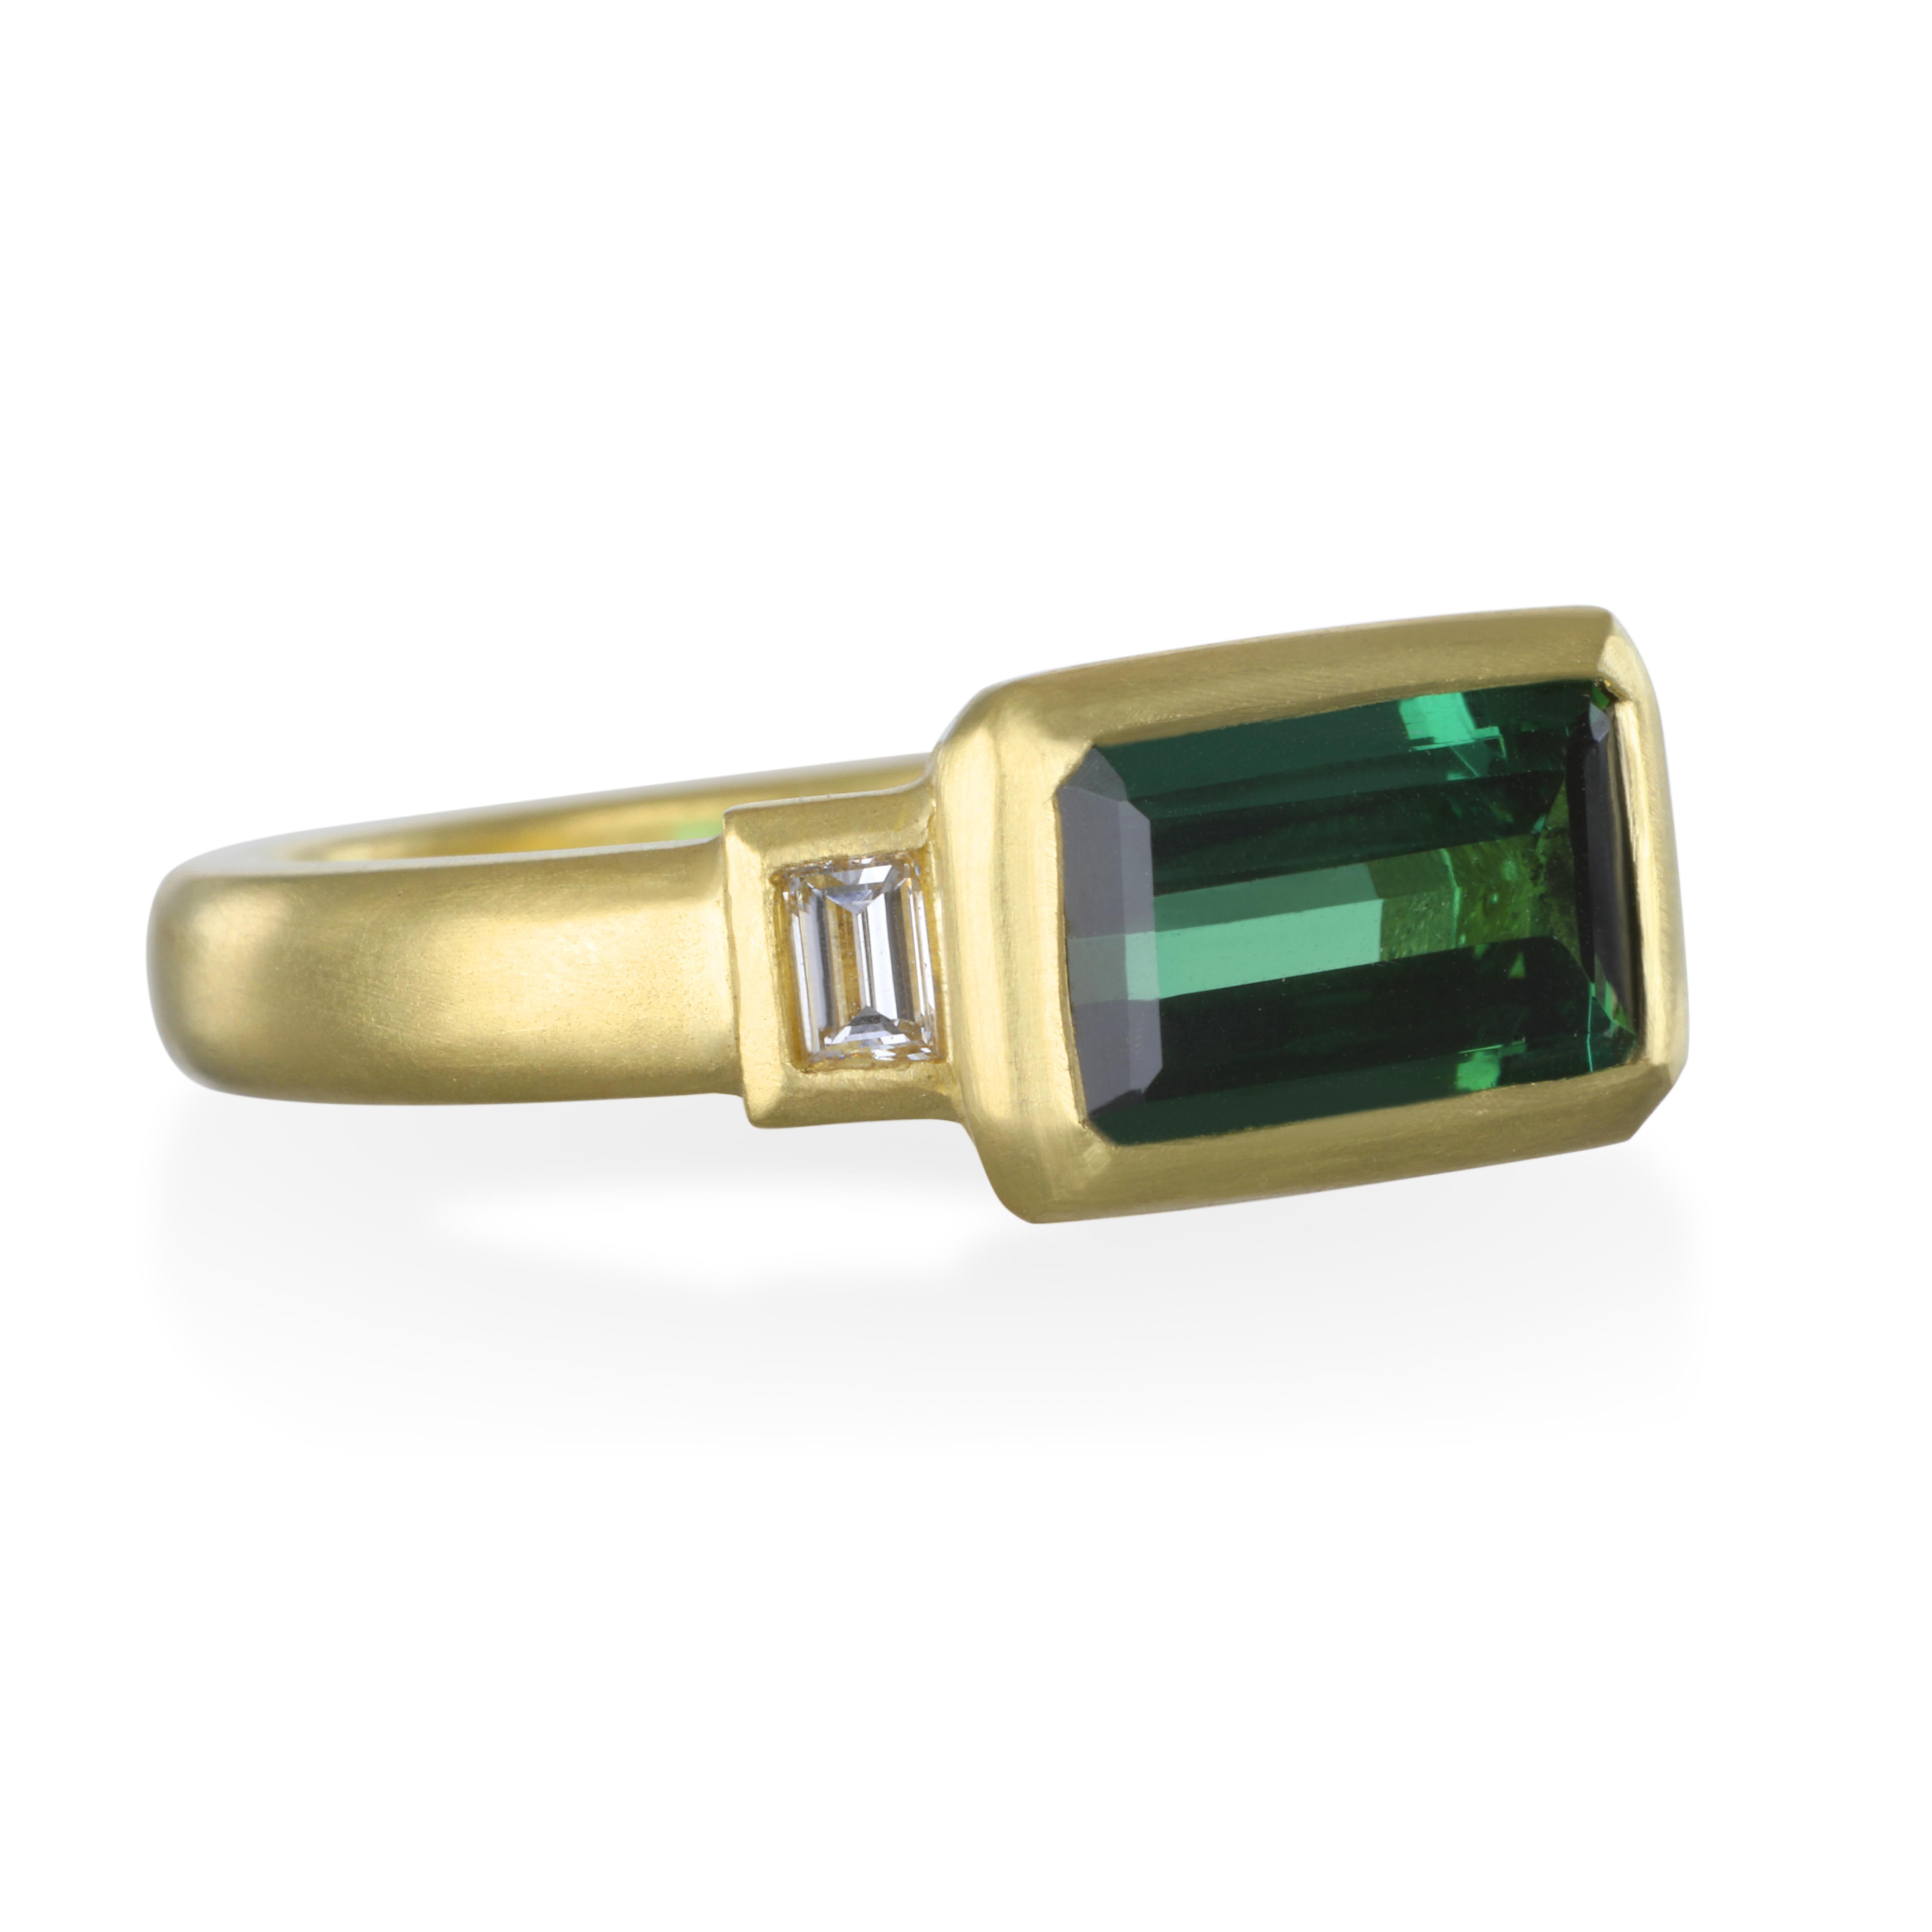 One of a Kind:
Faye Kim's 18k gold Green Tourmaline ring has exceptional even color, with a touch of Blue undertone that is highlighted by the Emerald cut and white diamond baguettes. A modern-day classic!

Size 7
Green Tourmaline 2.35 carats 